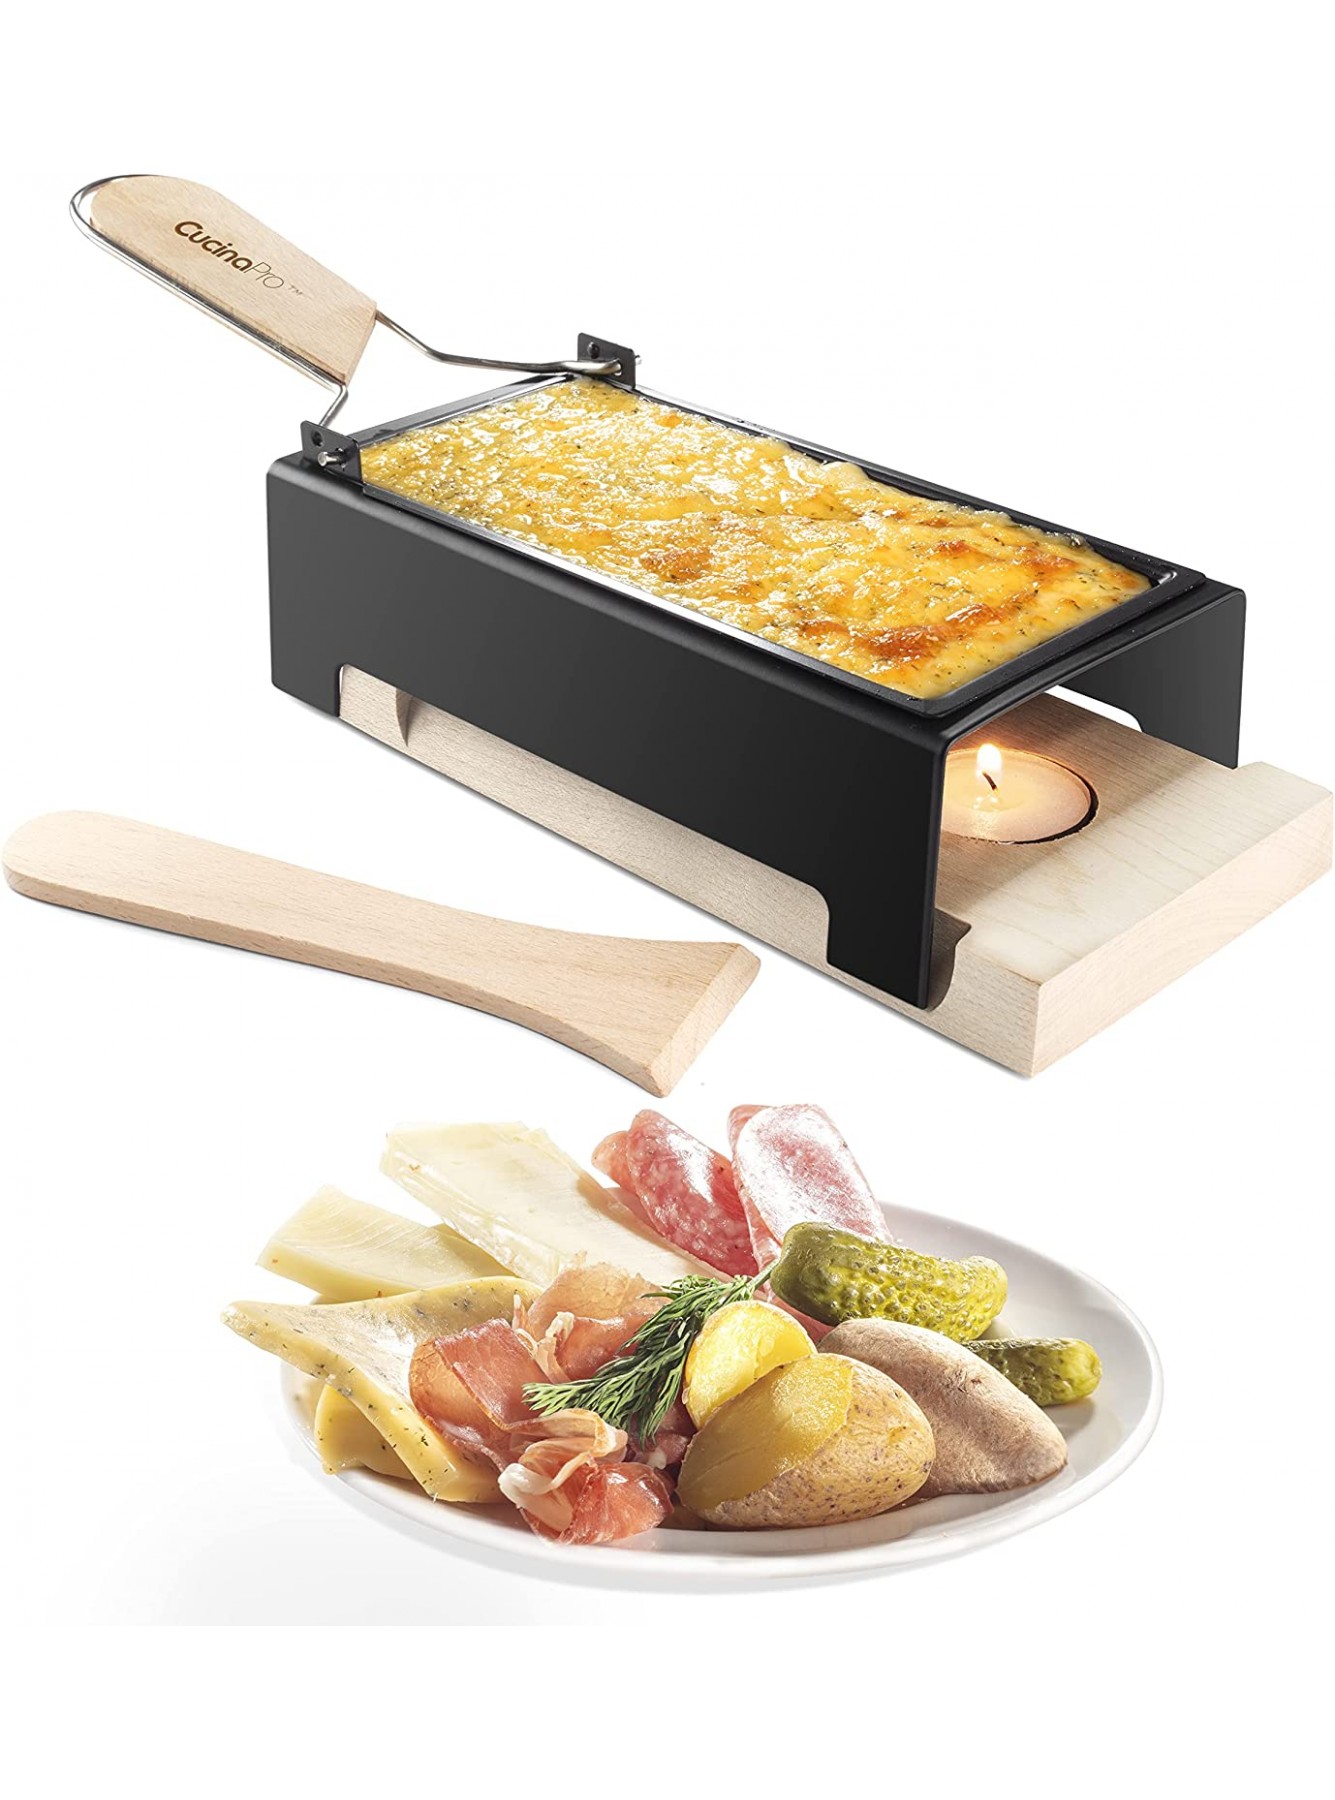 Cheese Raclette w Foldable Handle- Candlelight Cheese Melter Pan w Spatula and Candles- Melts in Under 4 Minutes Great Gift B077XKN5JR